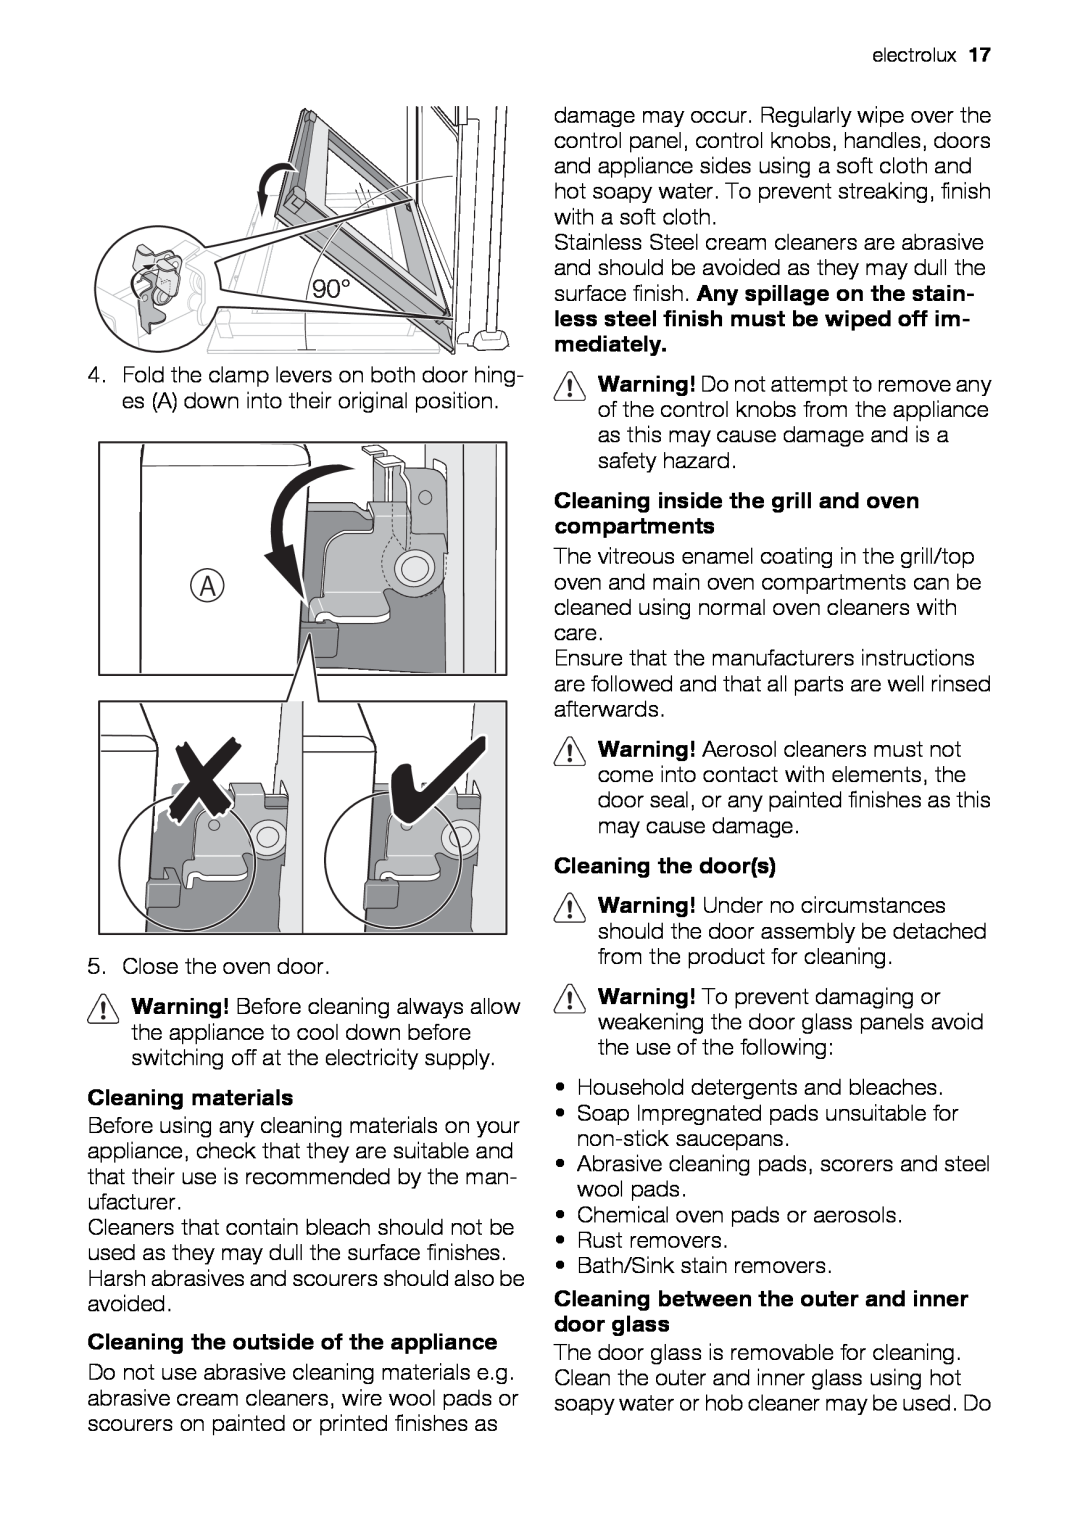 Electrolux EOU43003 user manual Cleaning materials, Cleaning the outside of the appliance, Cleaning the doors 